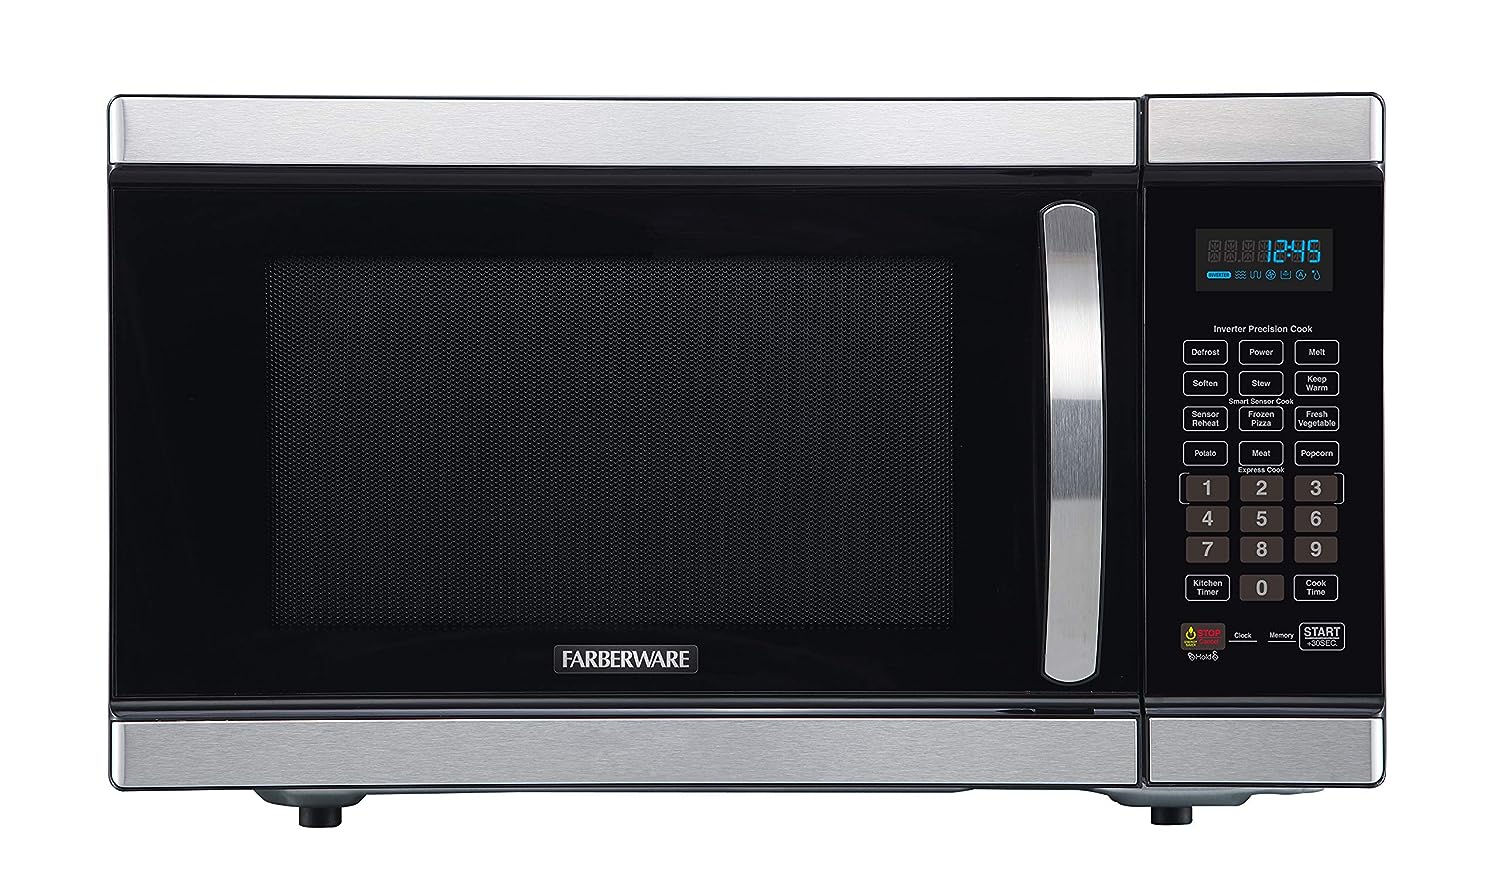 What Is The Best Microwave Oven Brand In India